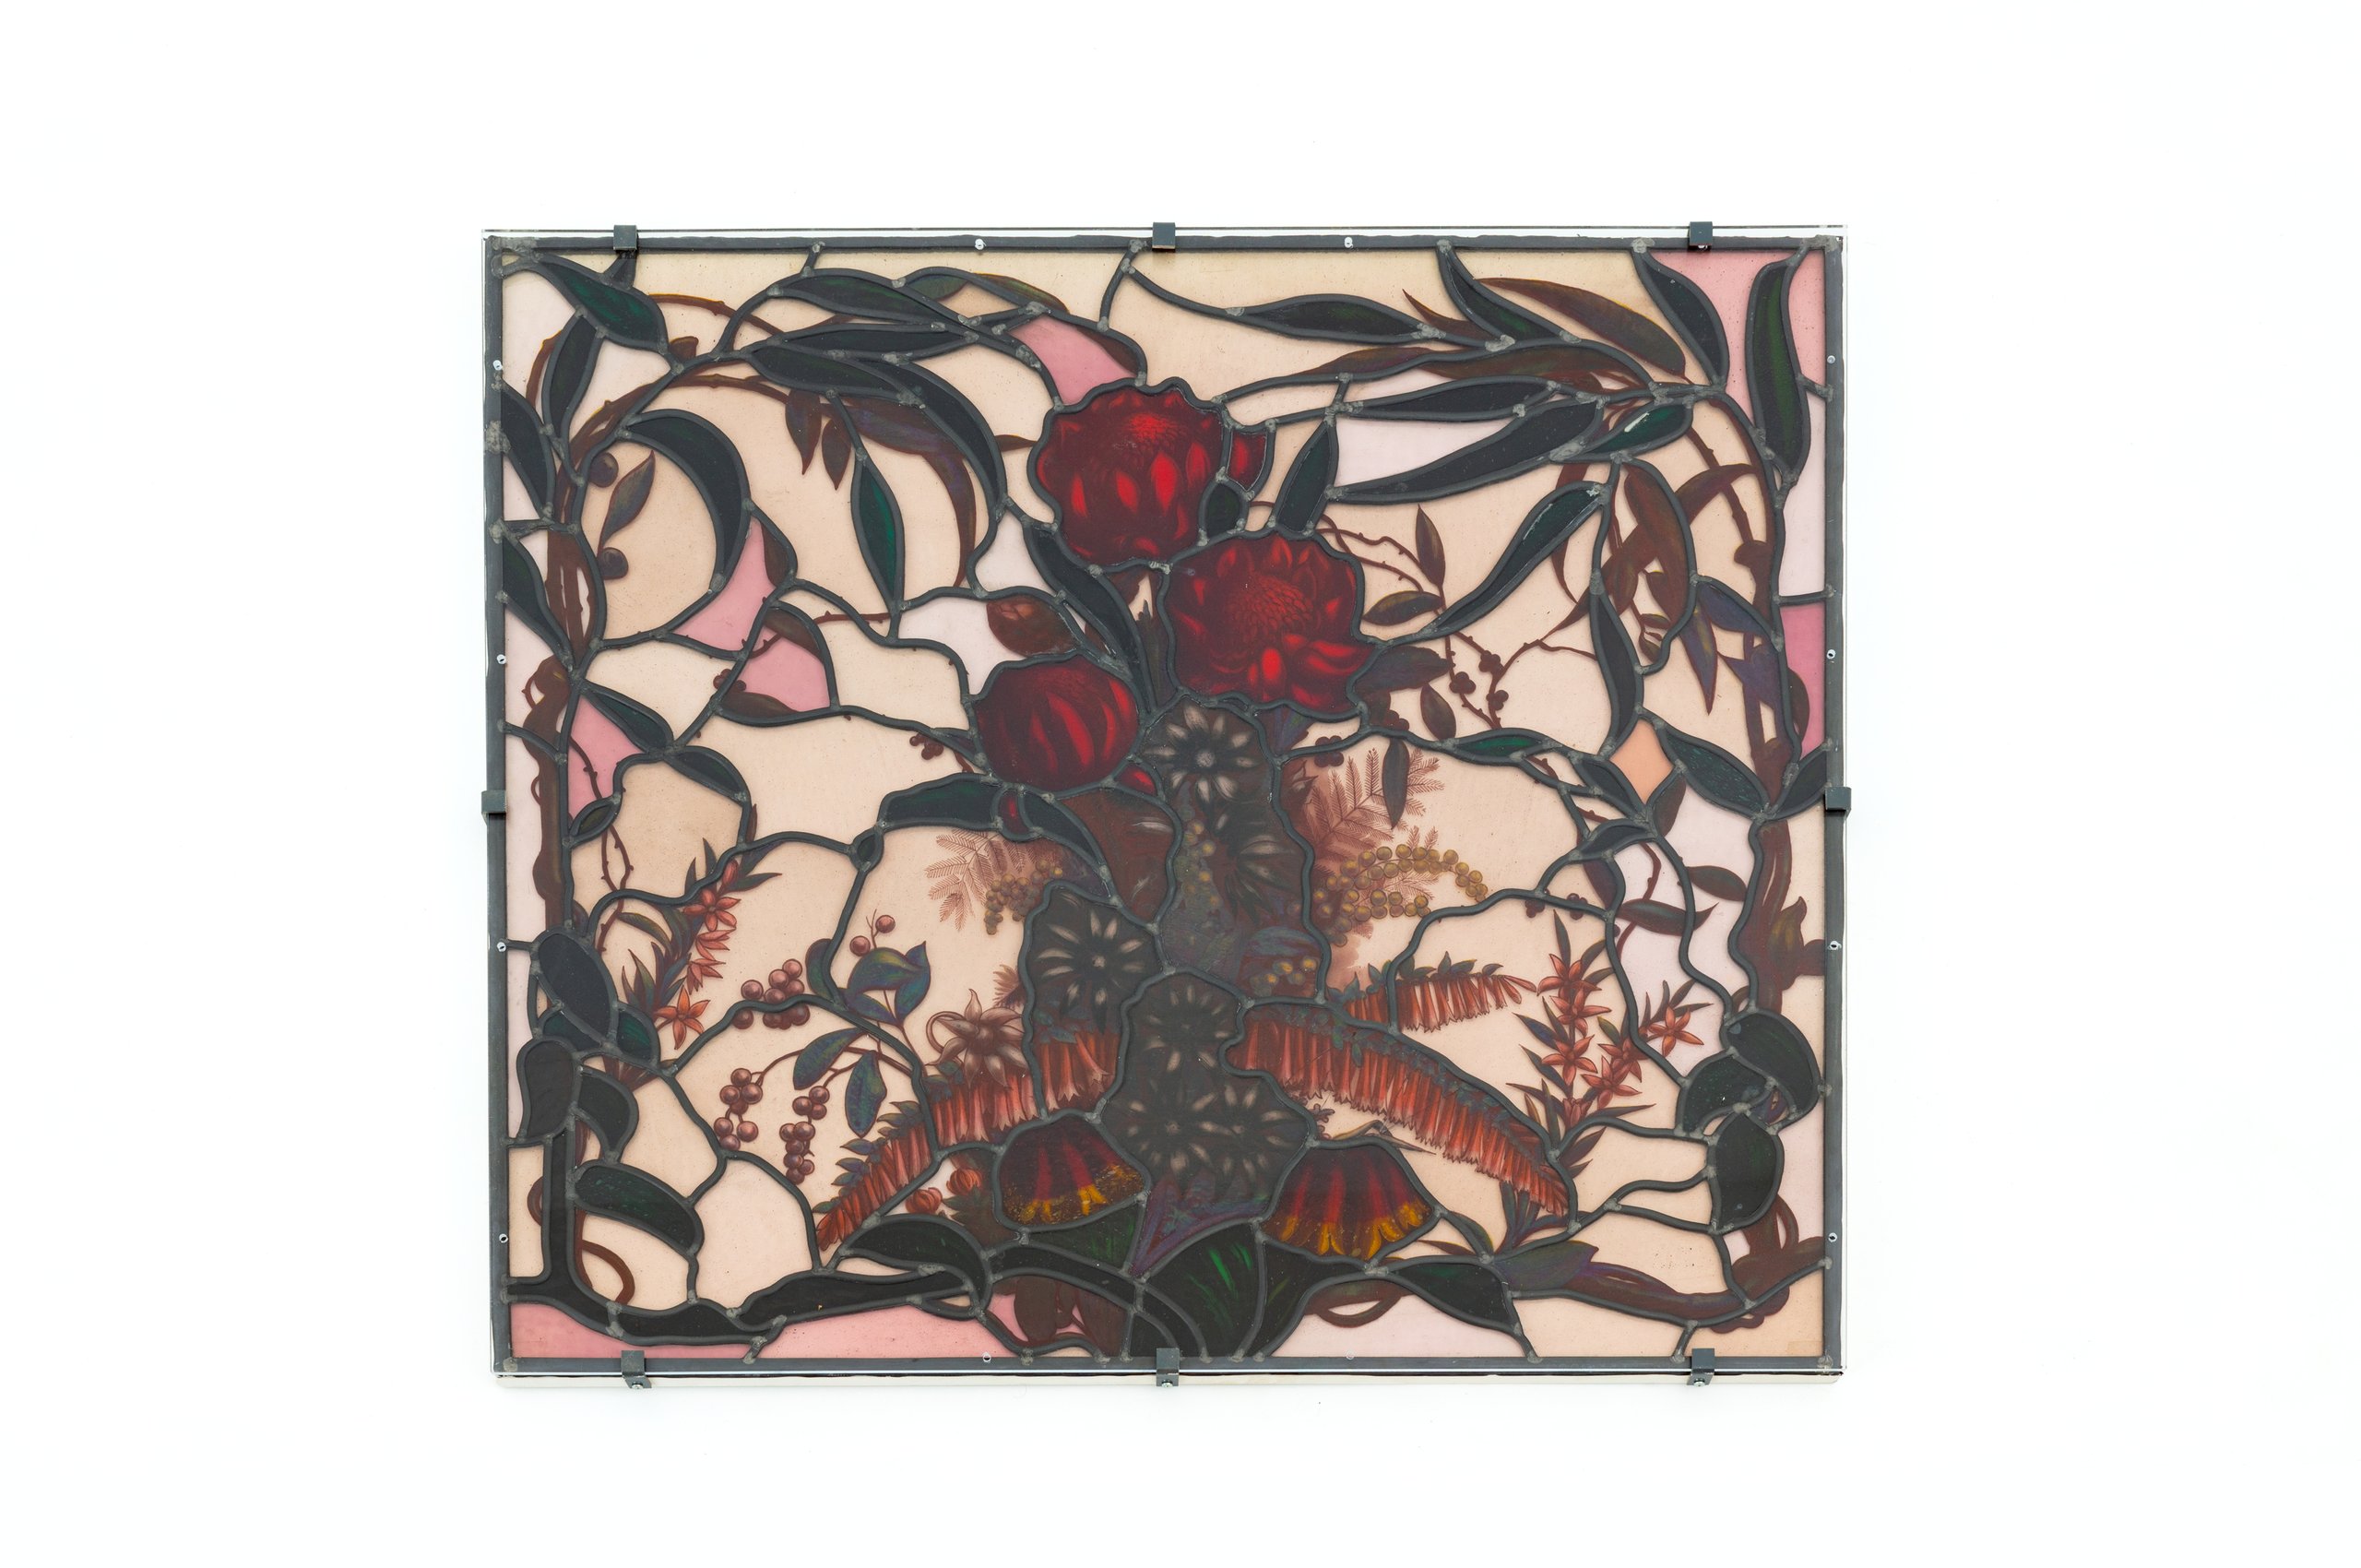 Stained glass panel with waratah design by George Hulme